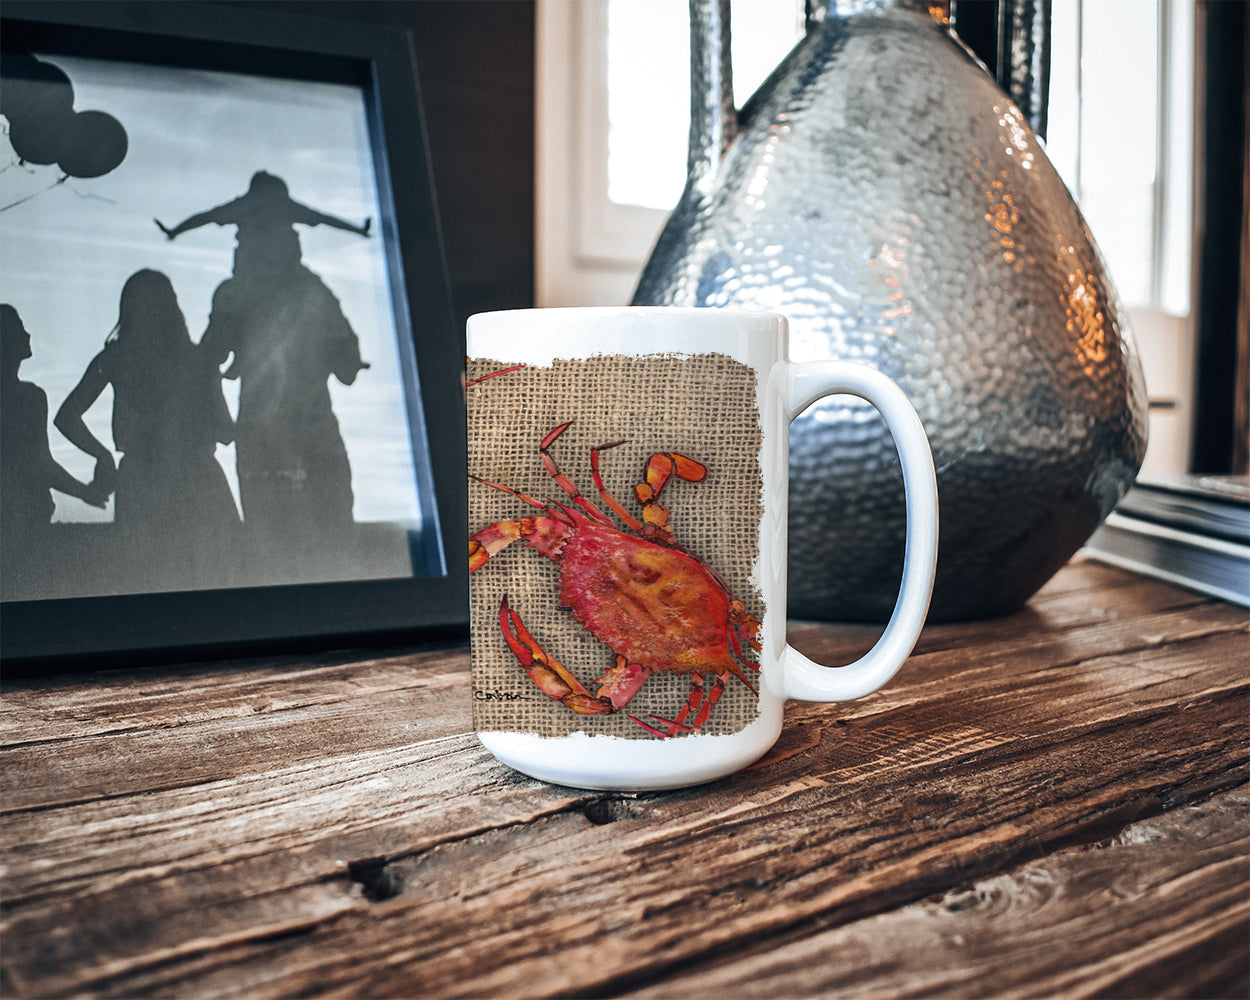 Cooked Crabs on Faux Burlap Dishwasher Safe Microwavable Ceramic Coffee Mug 15 ounce 8742CM15  the-store.com.